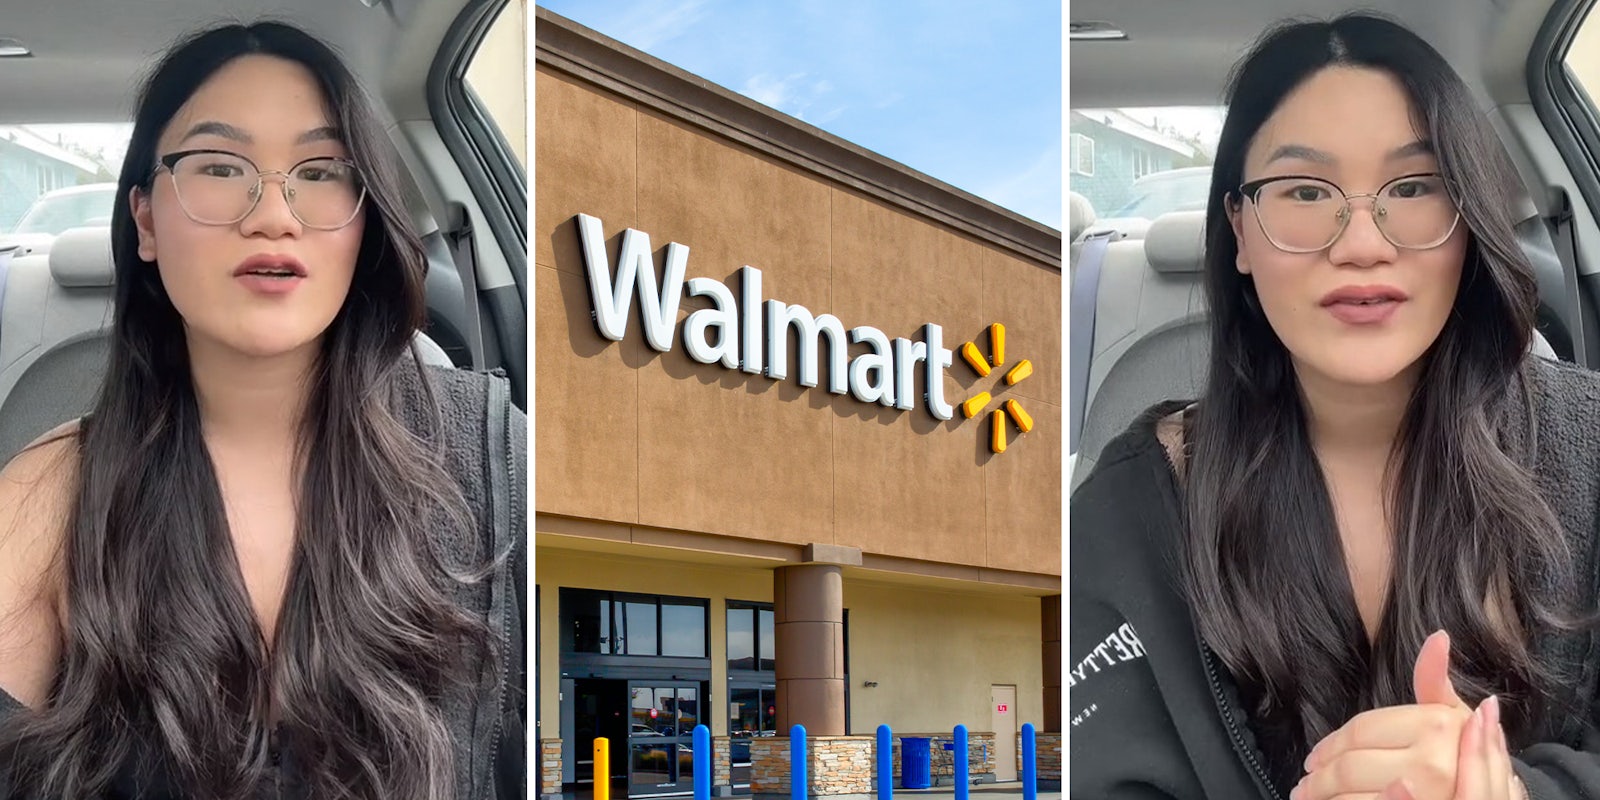 Walmart worker quits without giving 2 weeks' notice, says co-workers would bully her and team leads abused their power